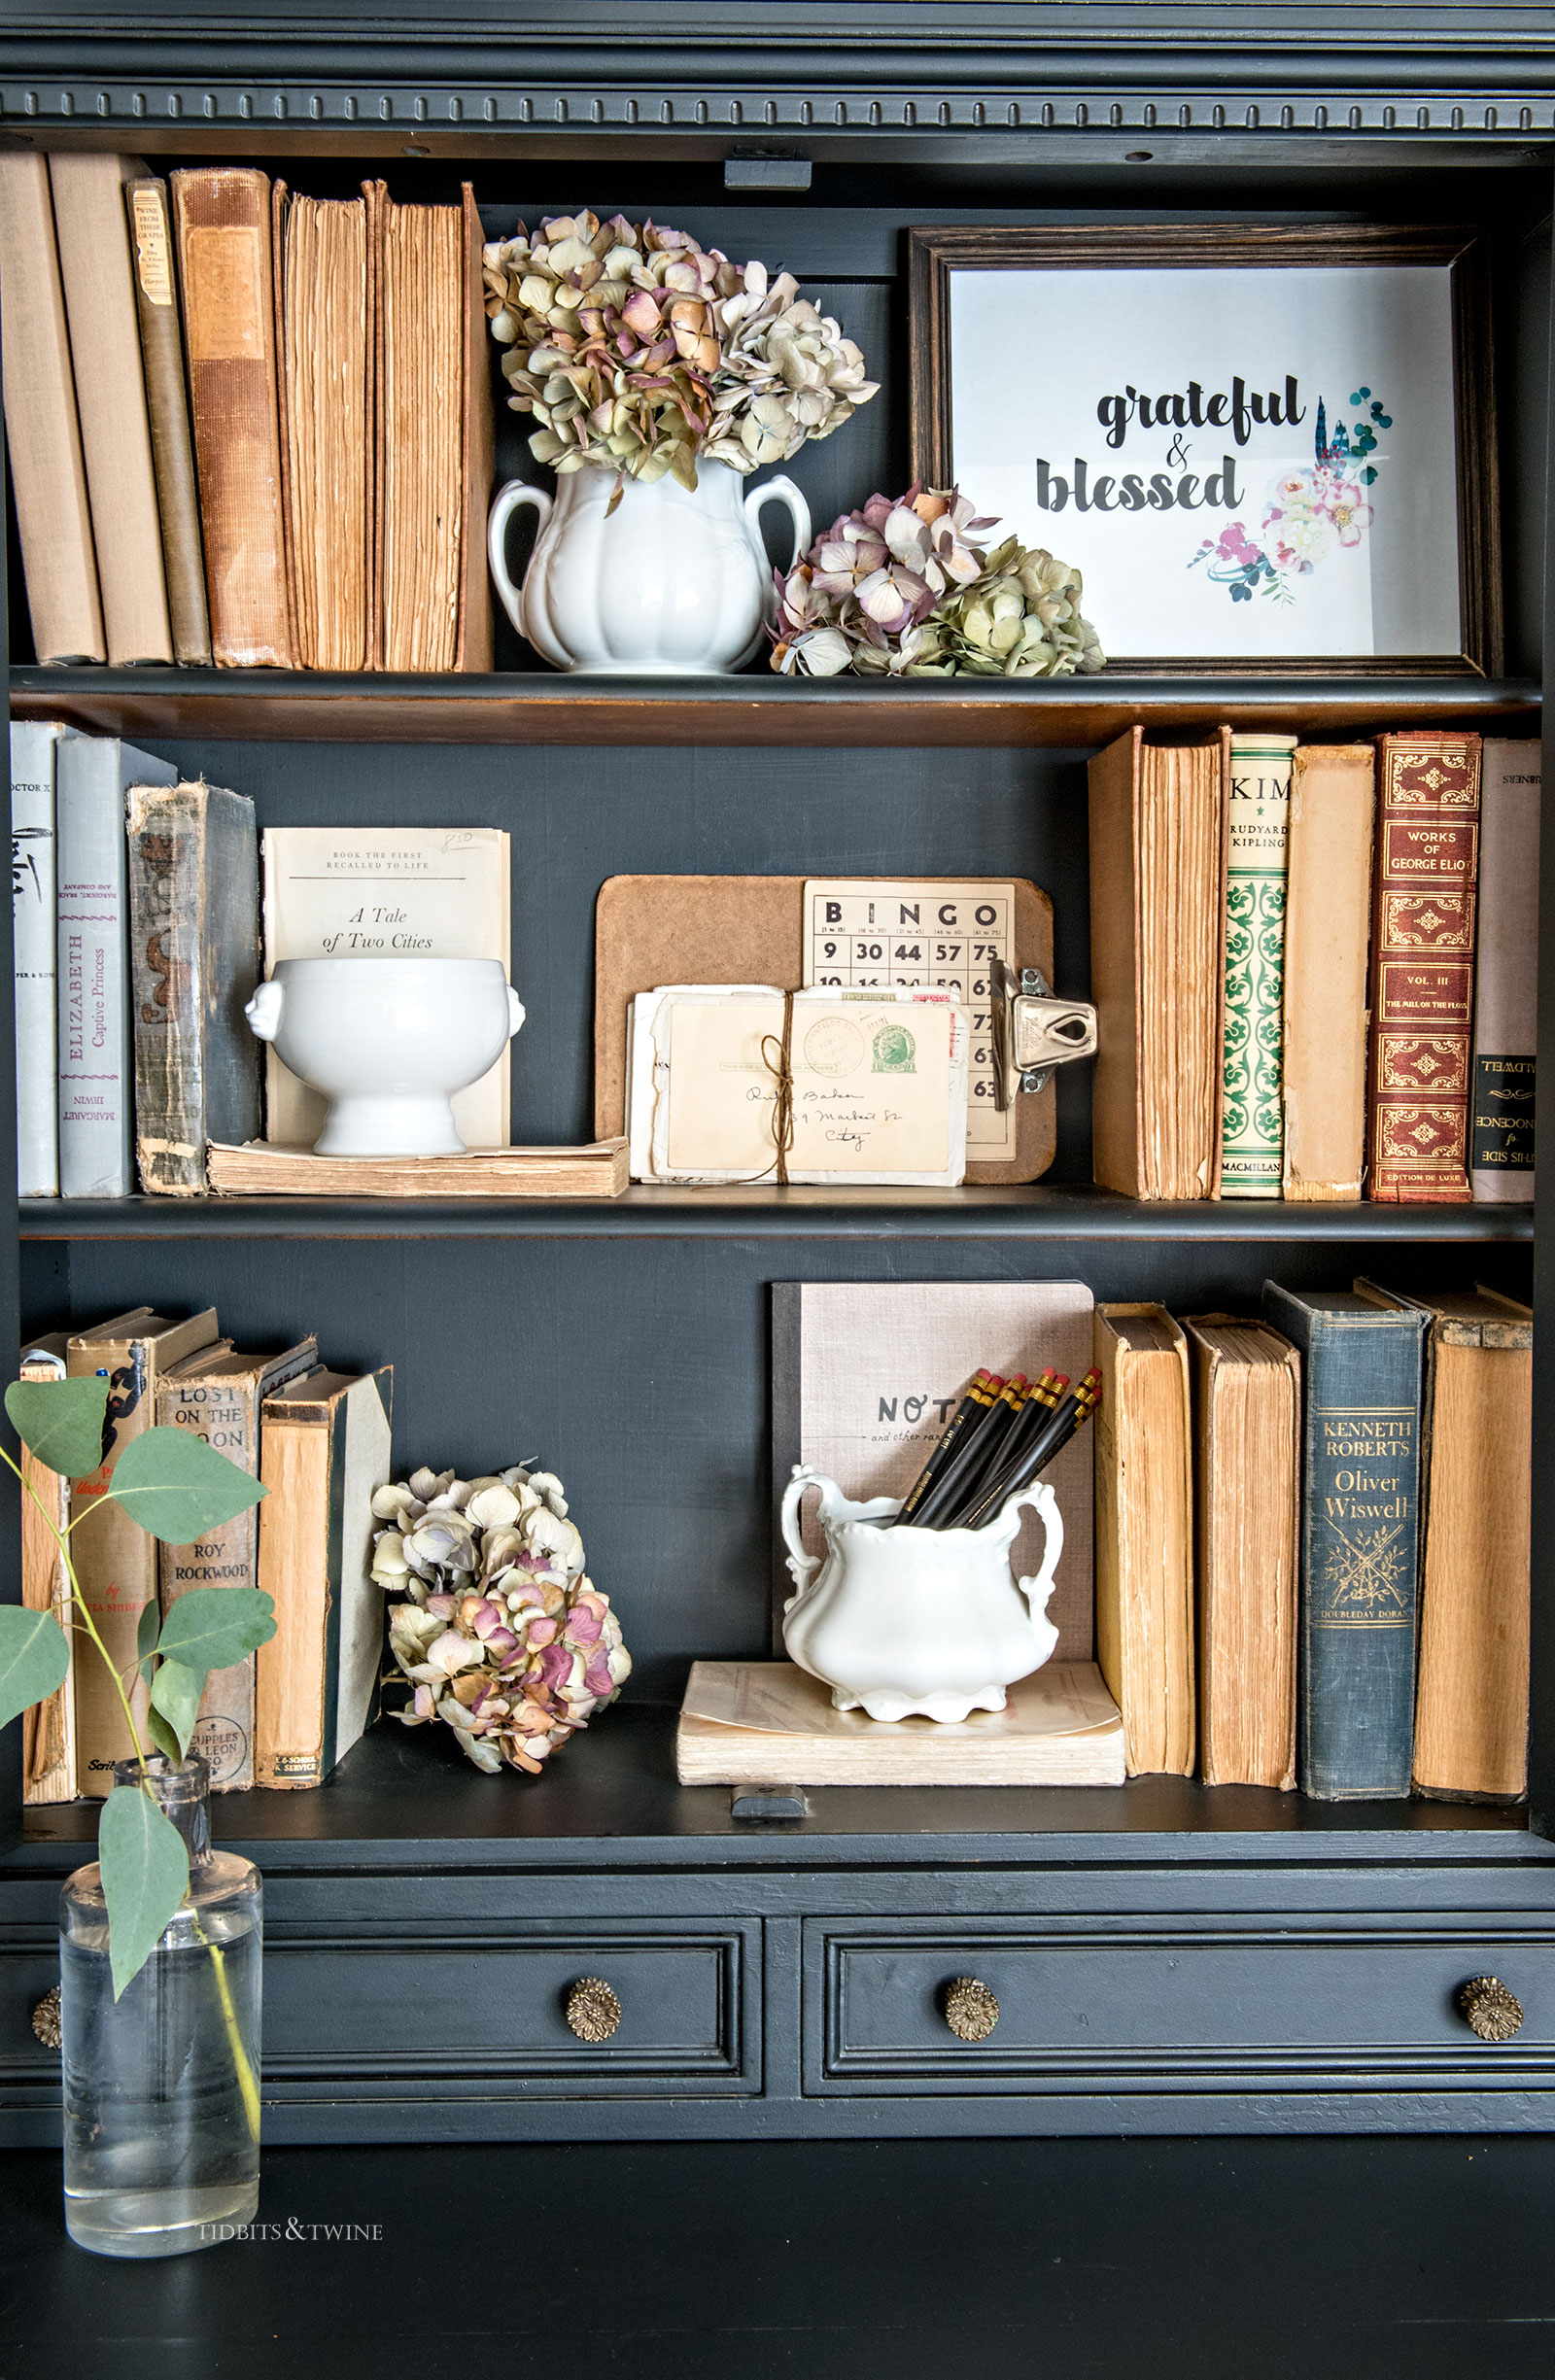 Styled bookshelf with vintage books, ironstone and free fall printable